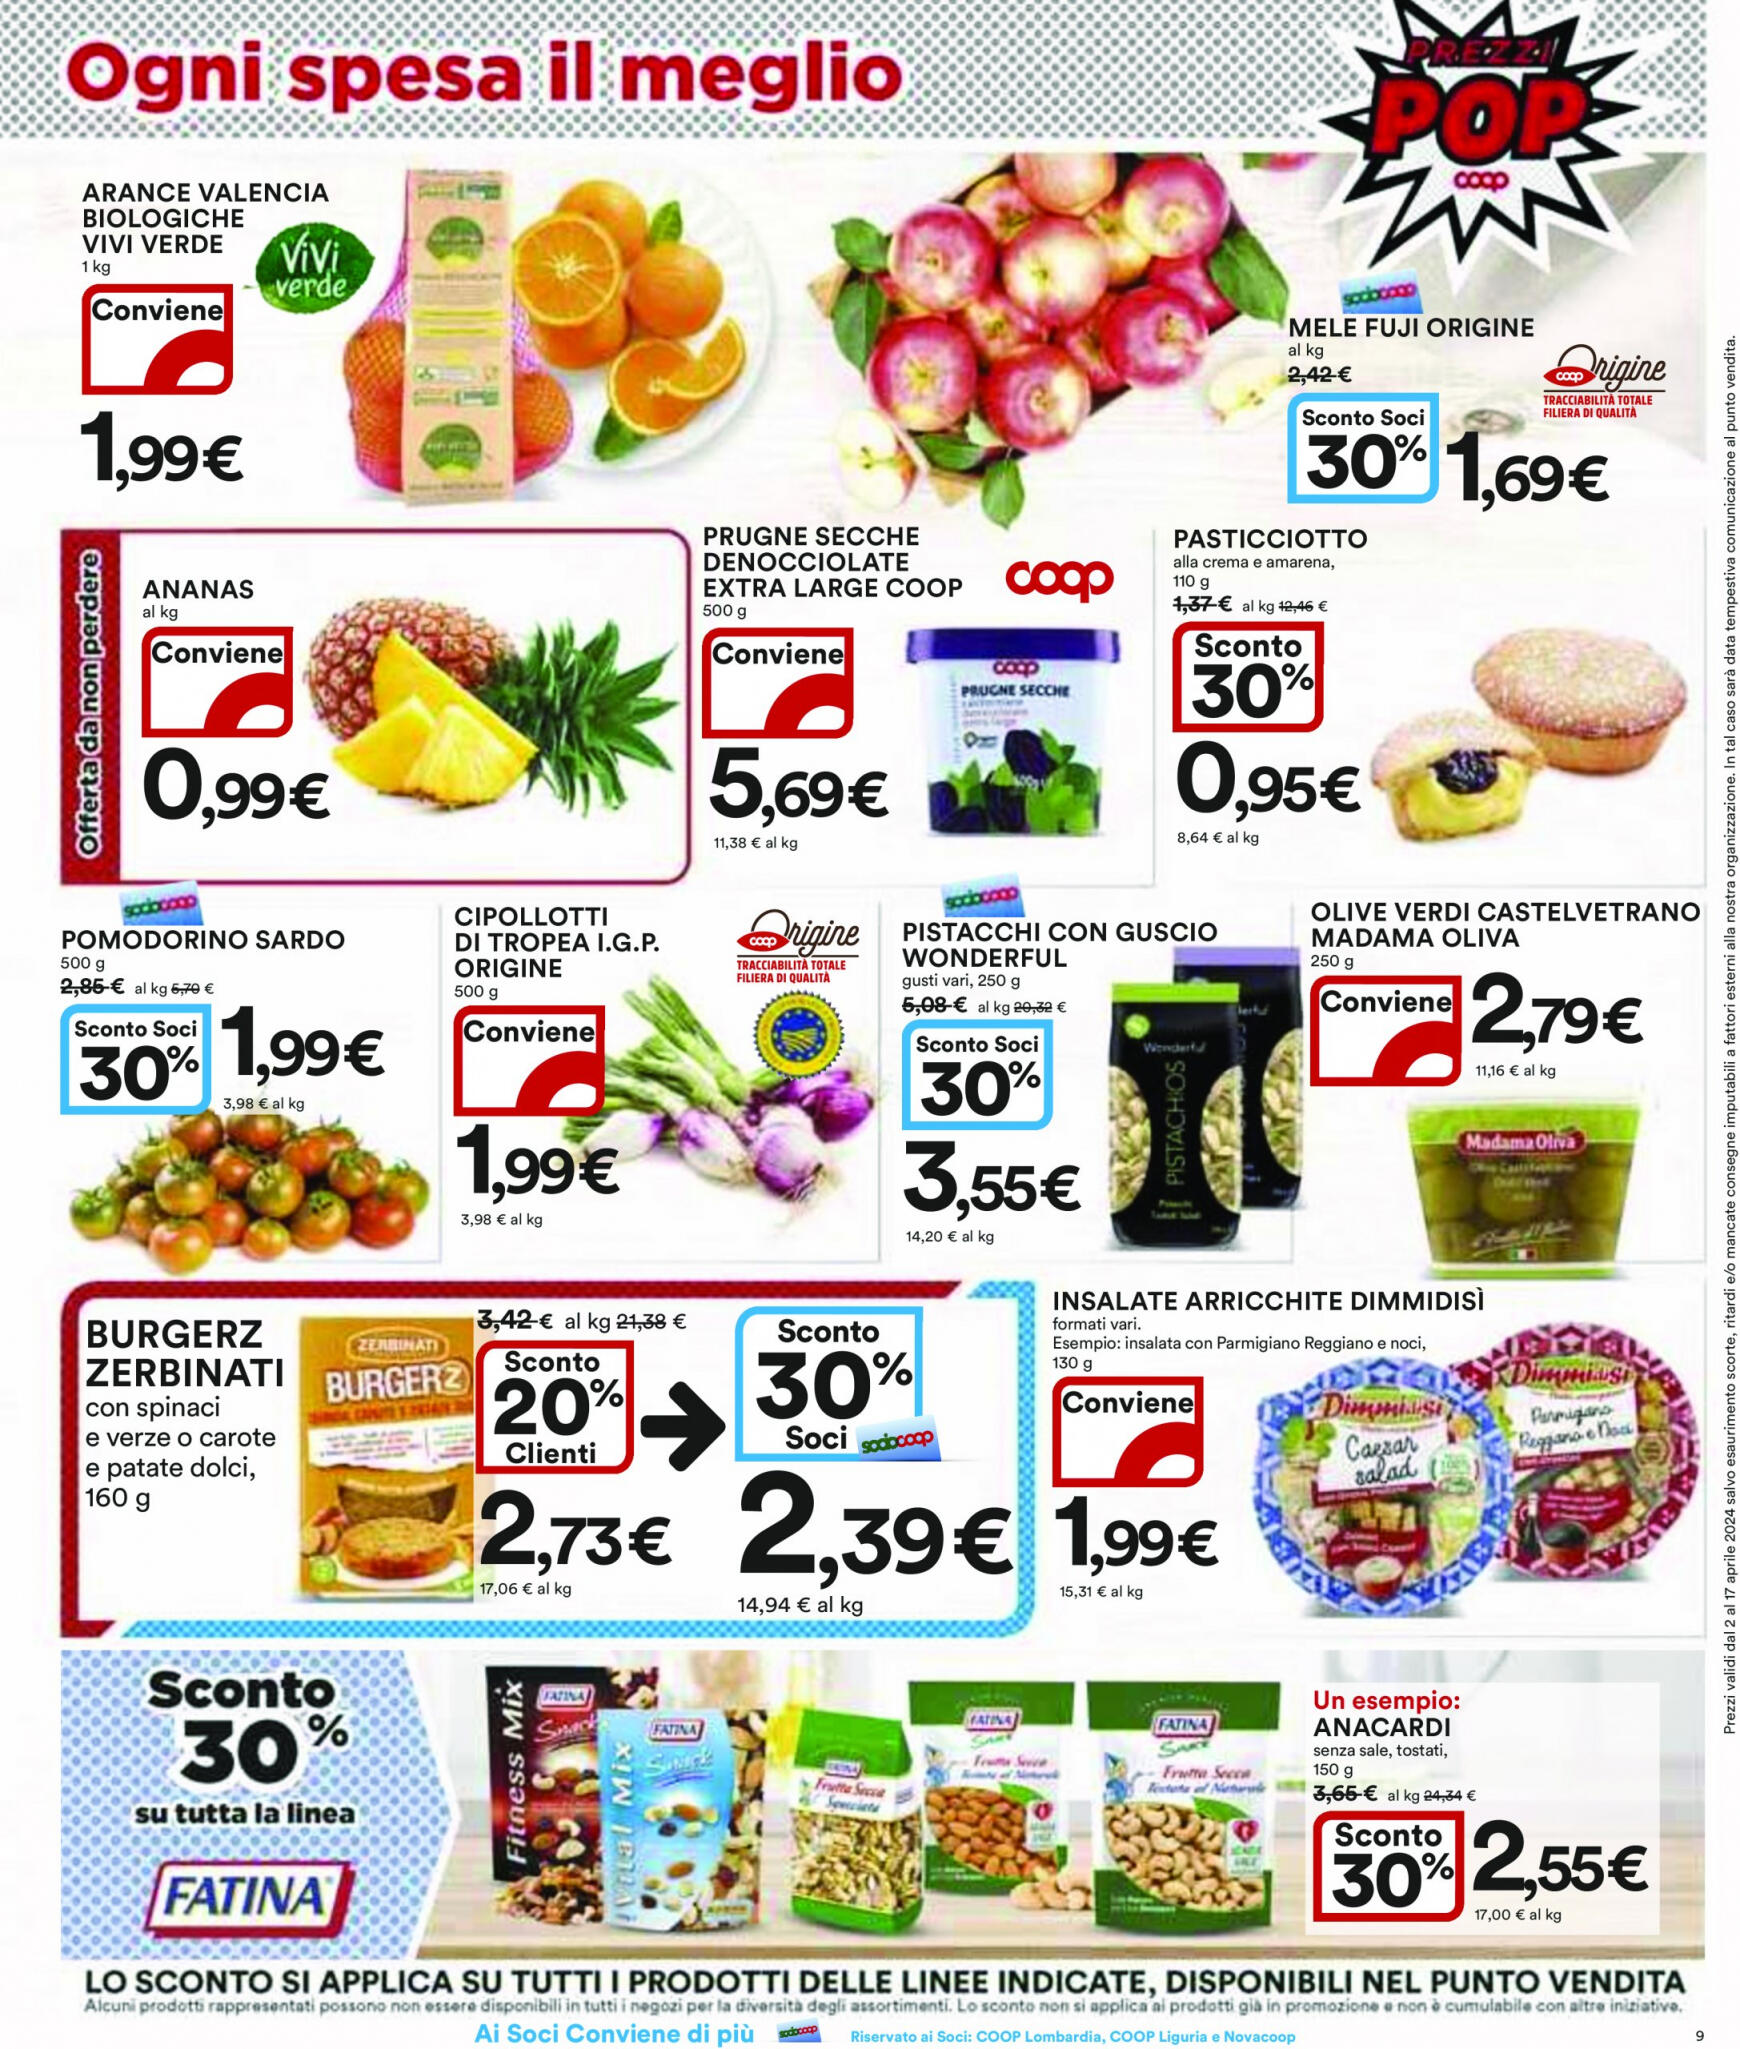 coop - Nuovo volantino Coop 02.04. - 17.04. - page: 9